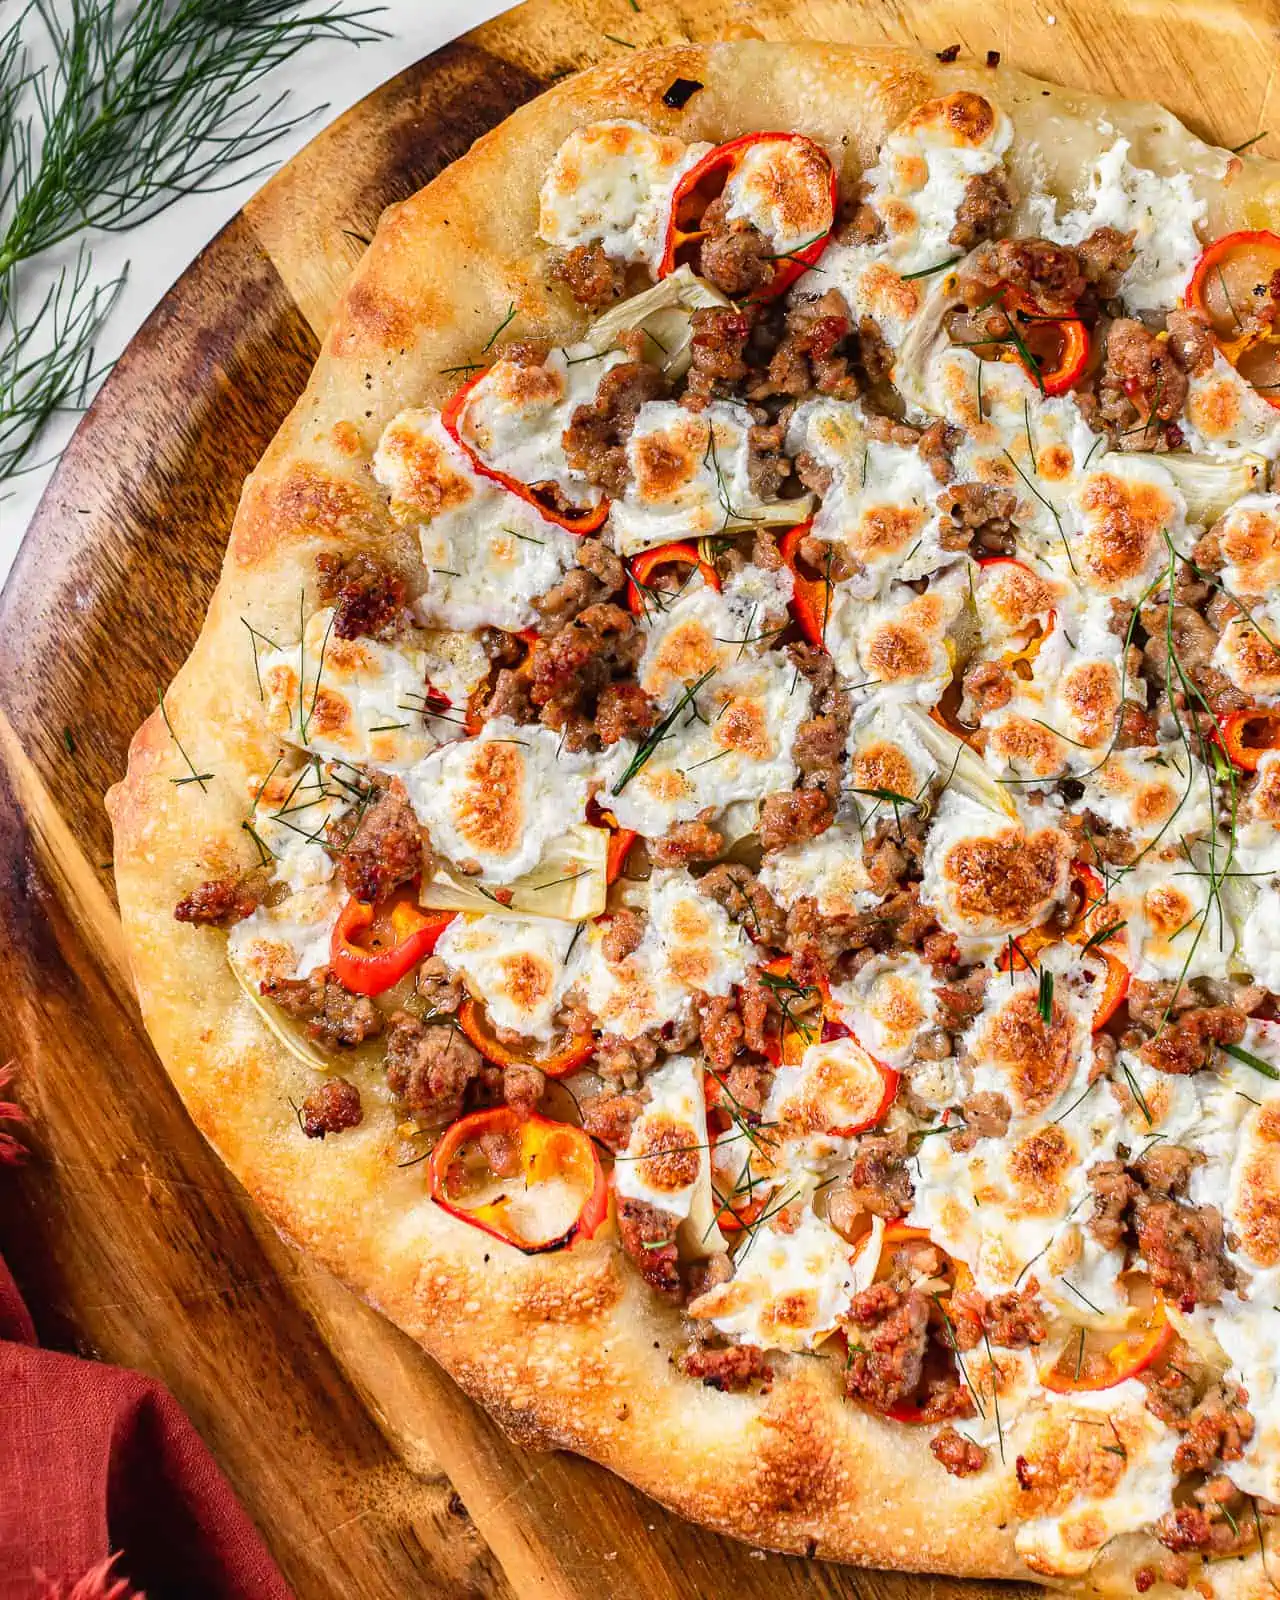 fennel and sausage pizza with mozzarella cheese. 